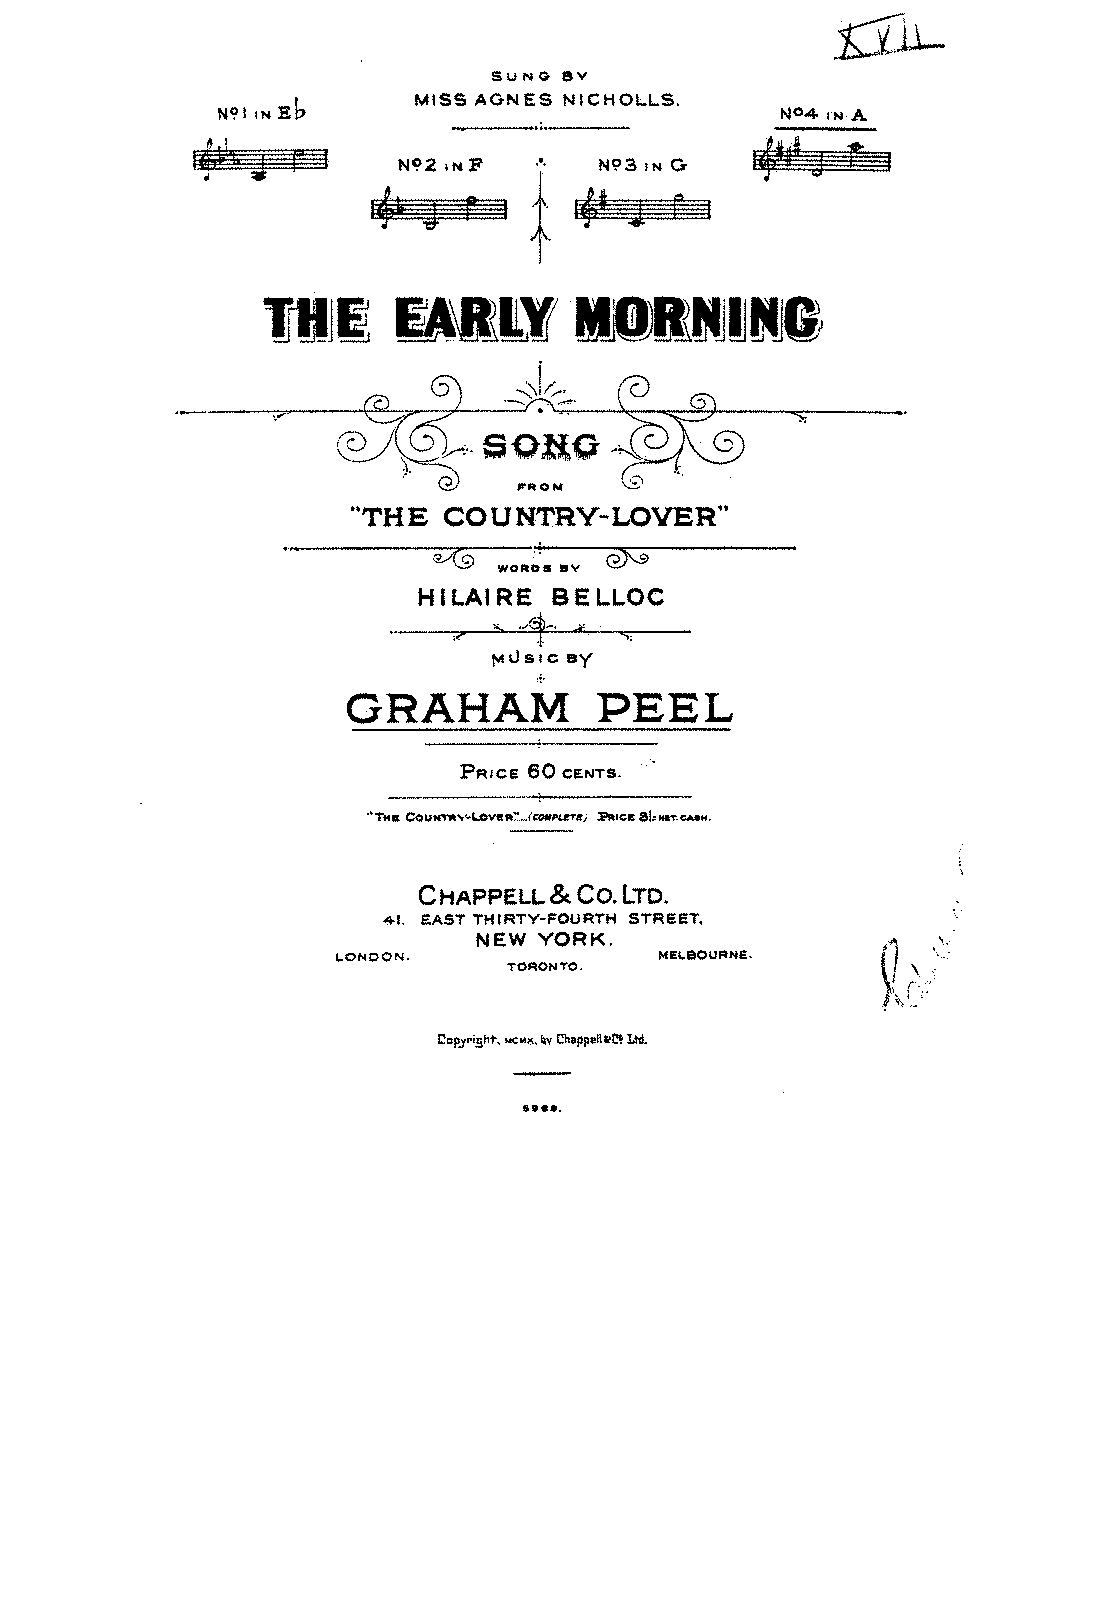 Peel - Early Morning, The for voice + piano